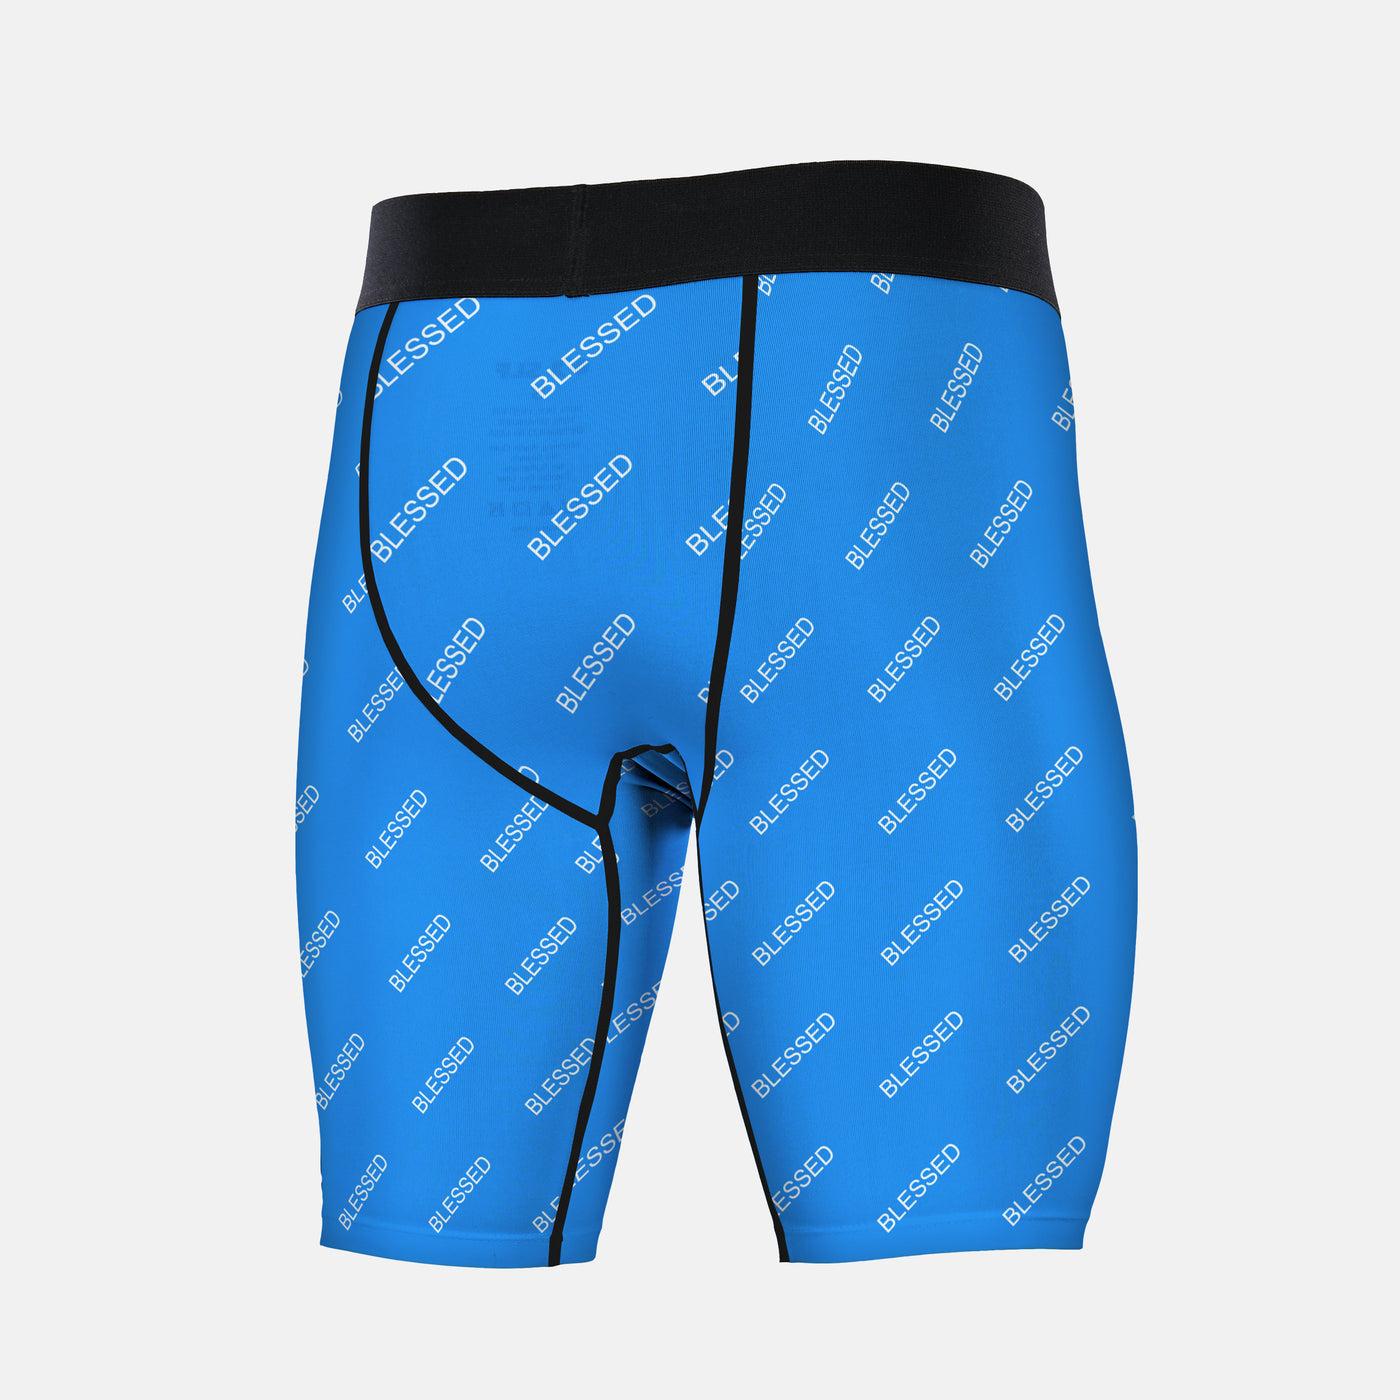 Blessed Pattern Blue Compression Shorts